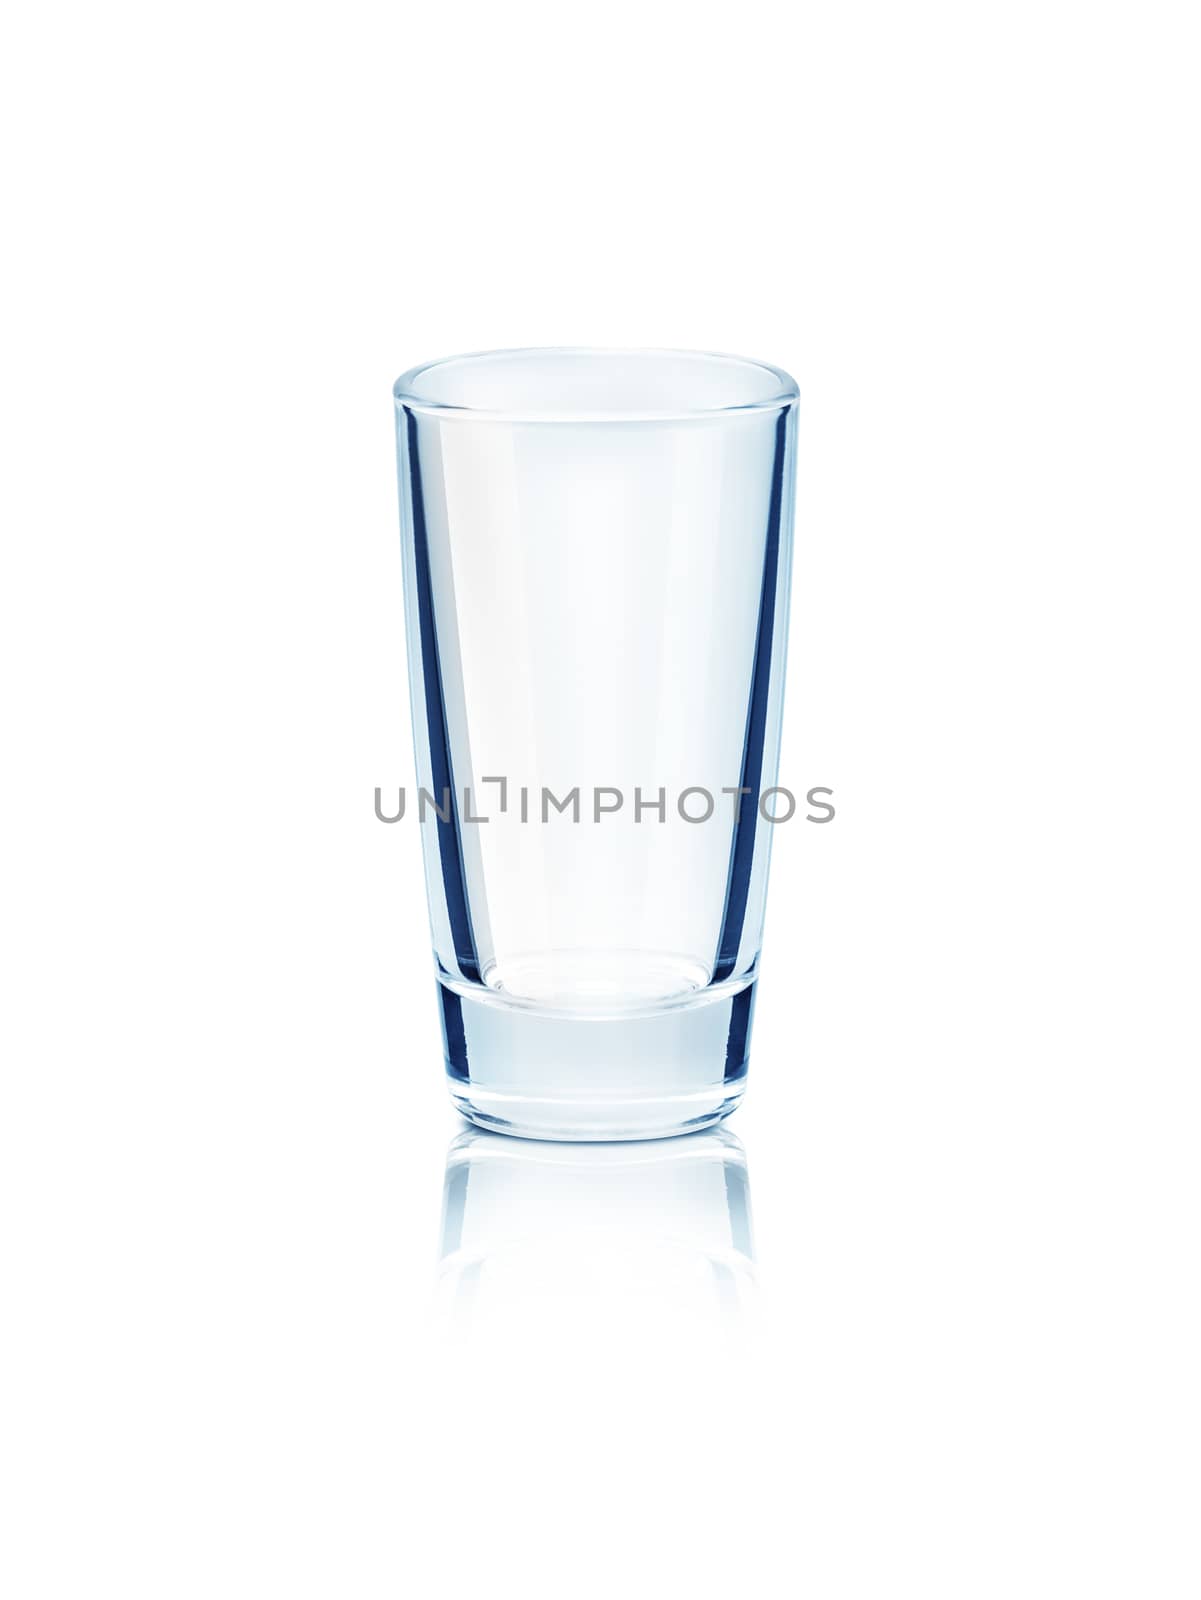 Empty glass on a reflective surface on isolated on white background